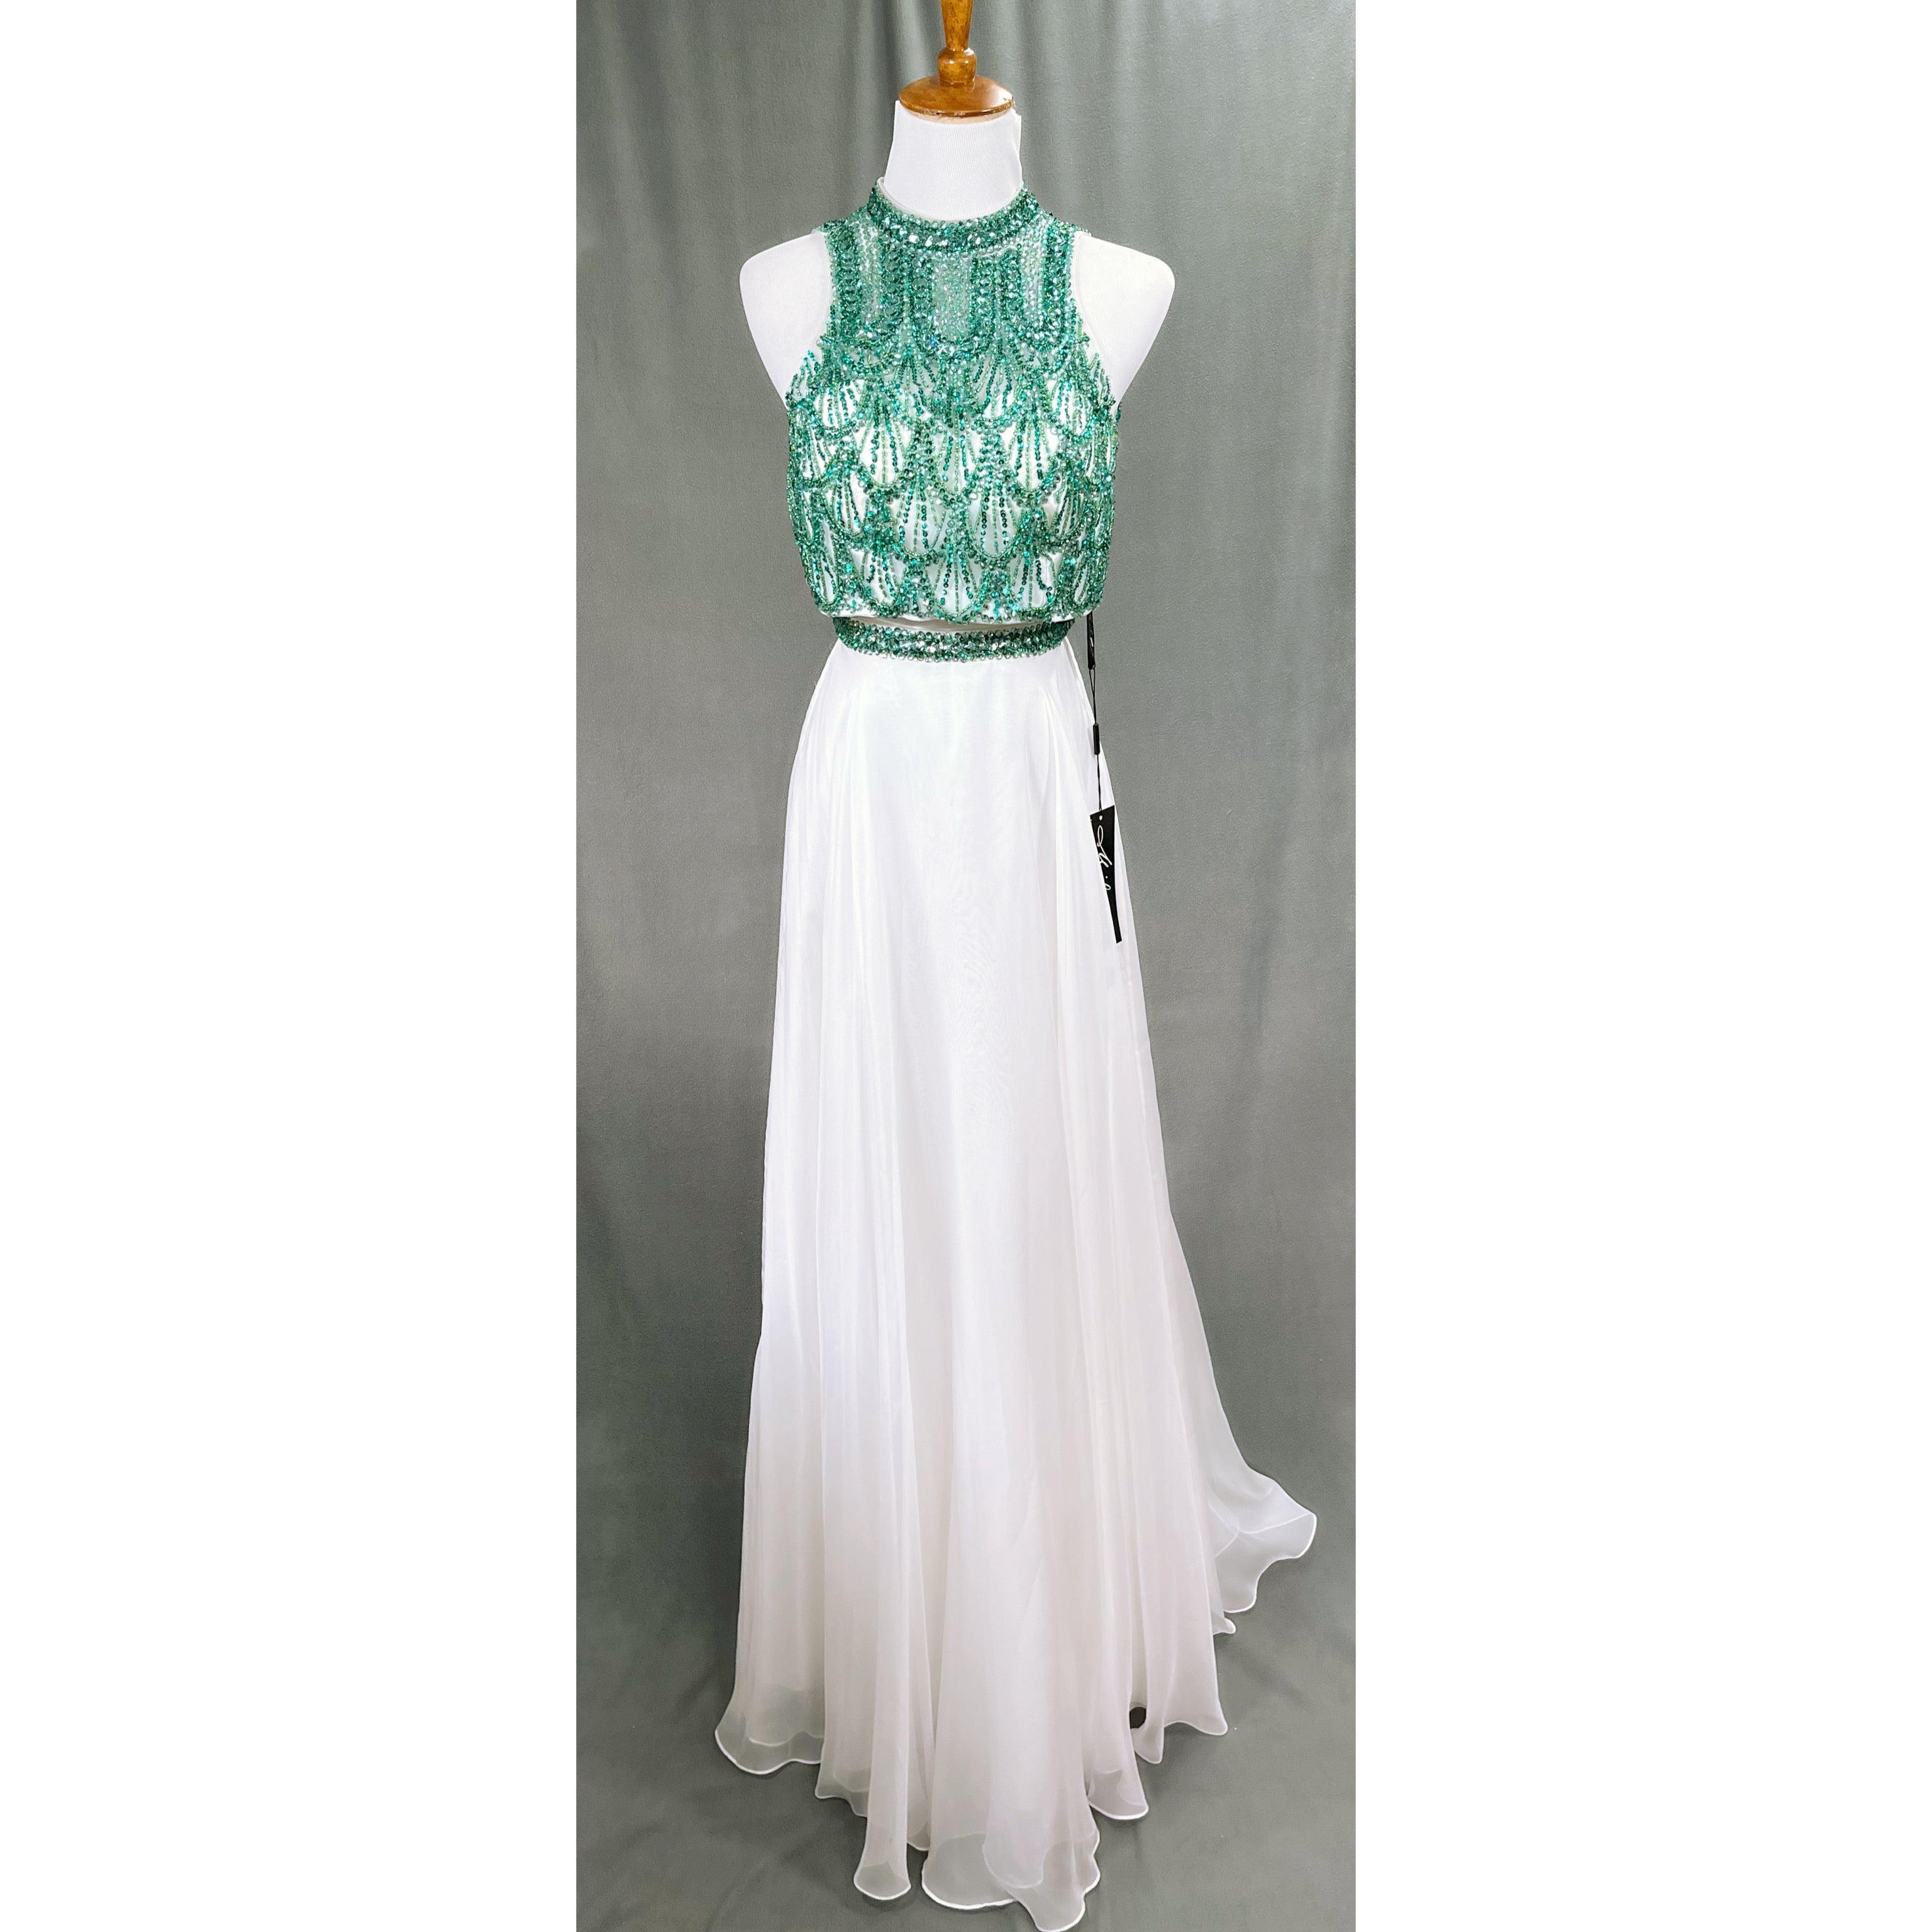 Milano white & emerald dress, size 0, NEW WITH TAGS!